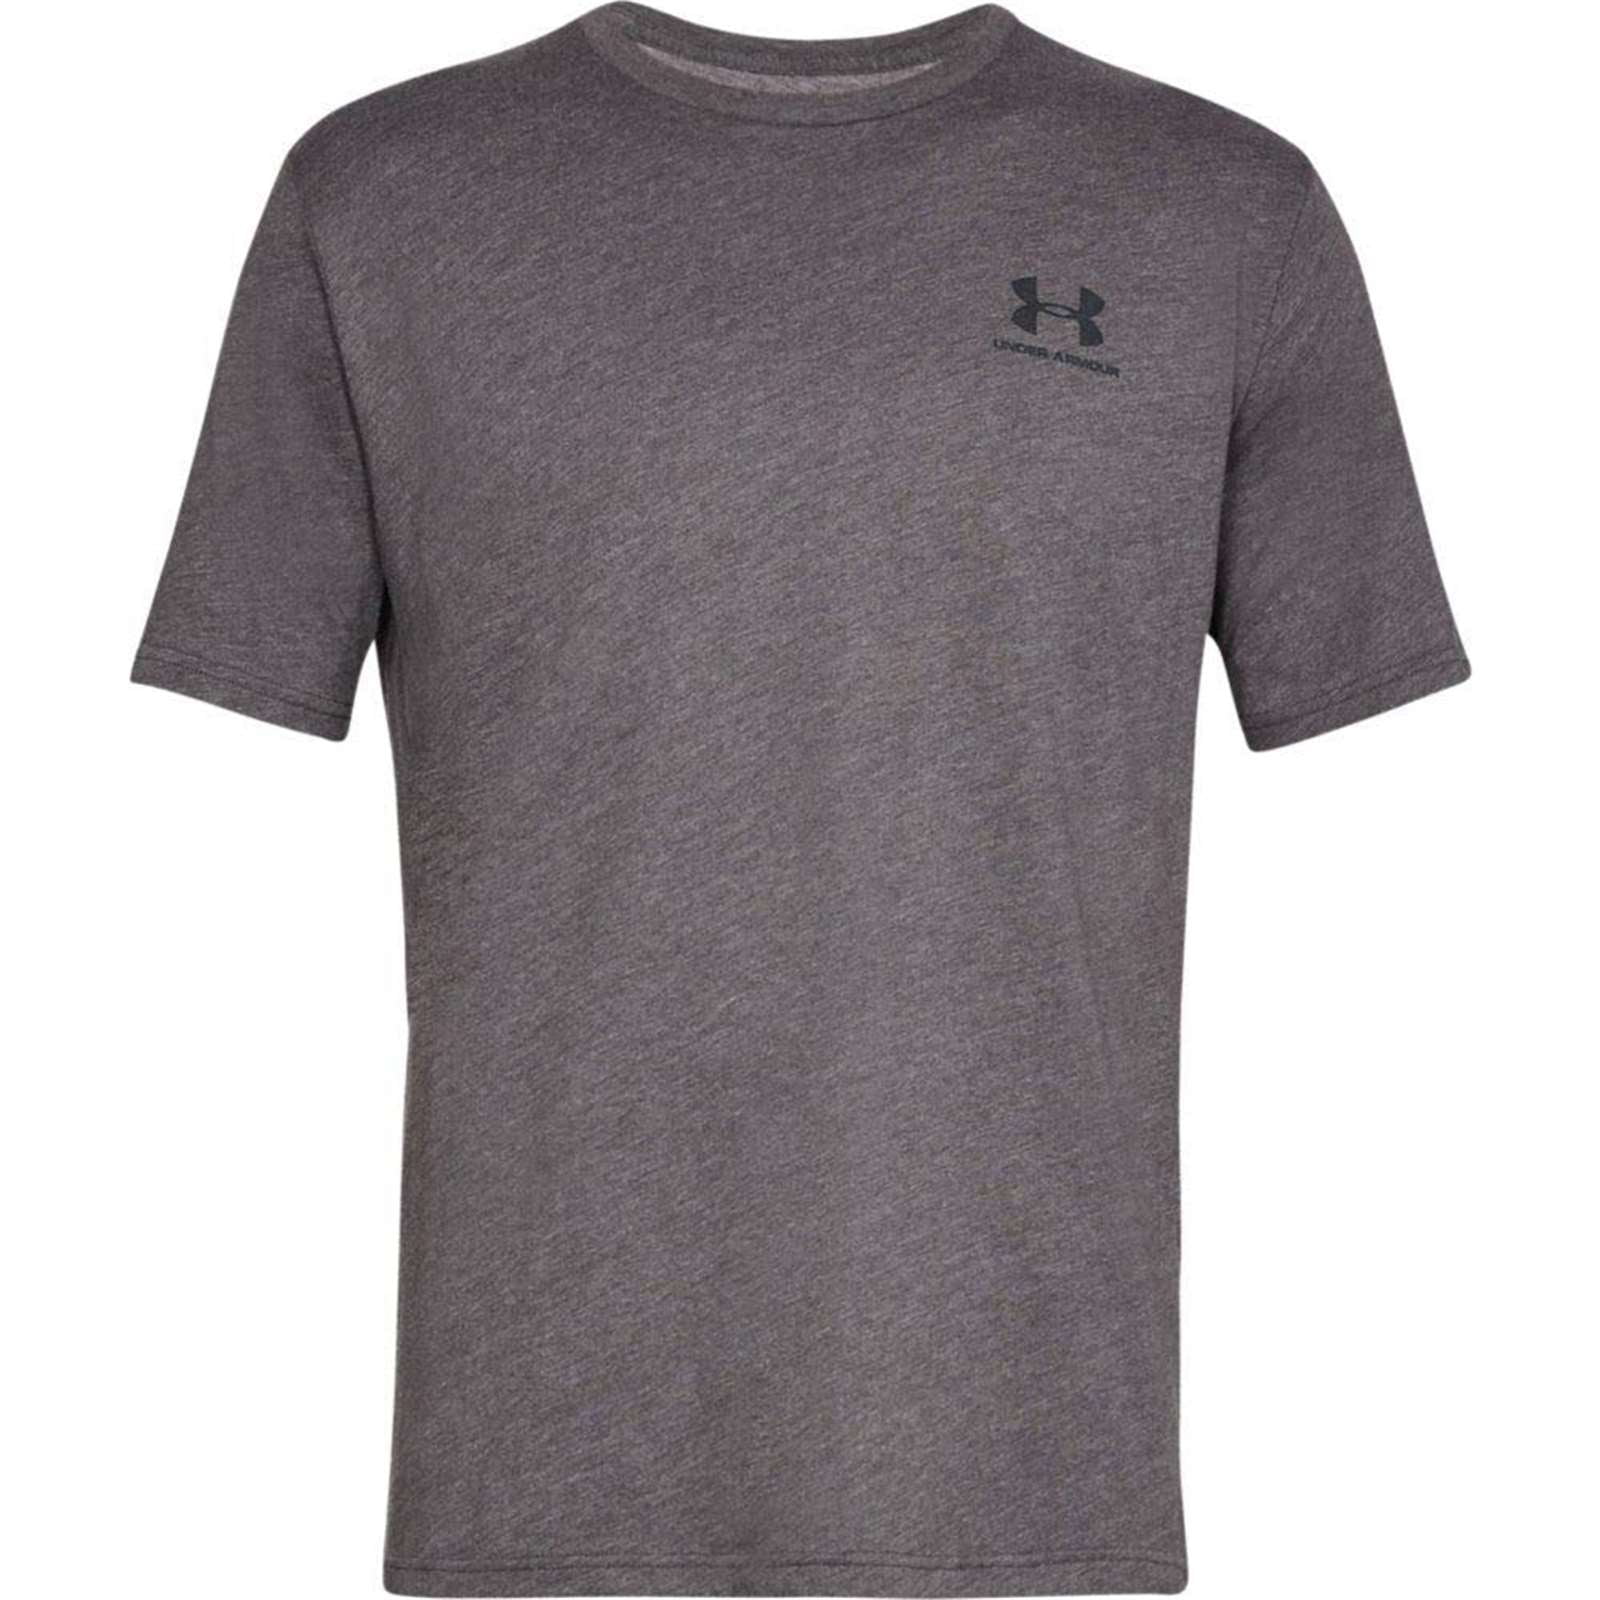 Under Armour Mens Sportstyle Left Chest T Shirt Tee Top Grey Sports Gym Running